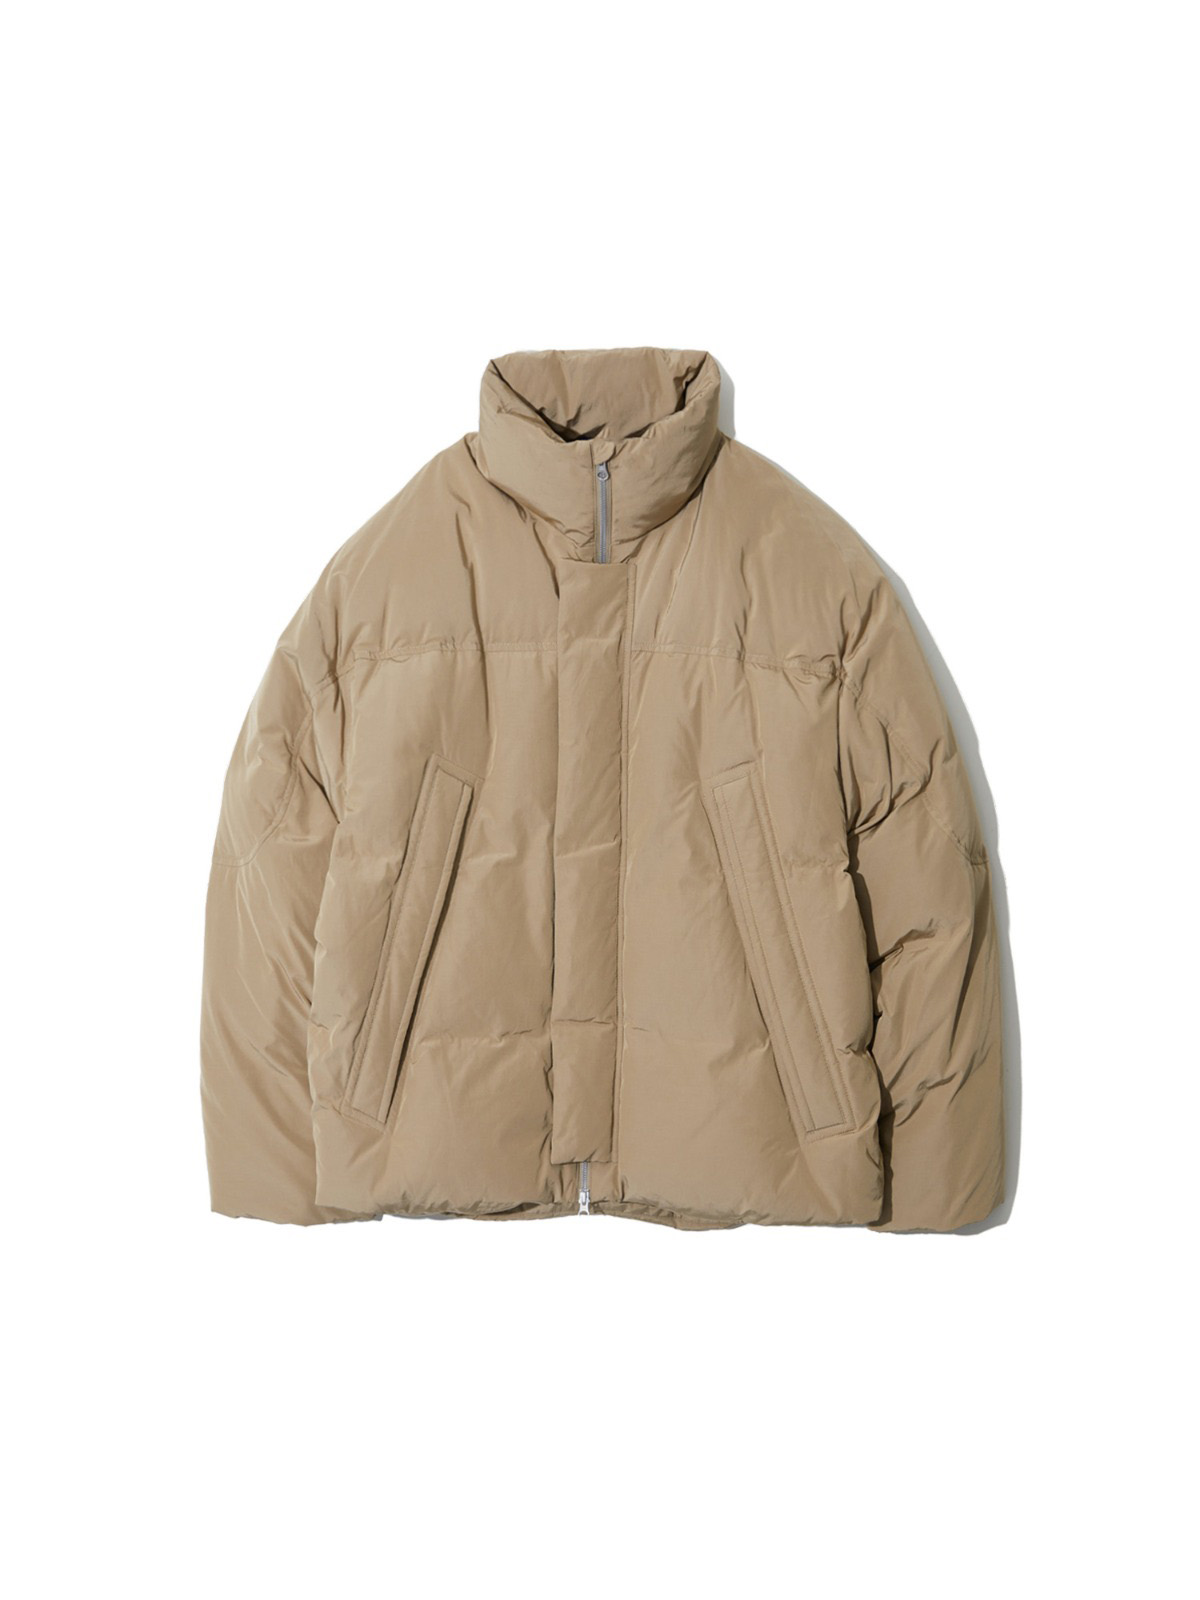 GOOSE DOWN DAILY JACKET (BEIGE)